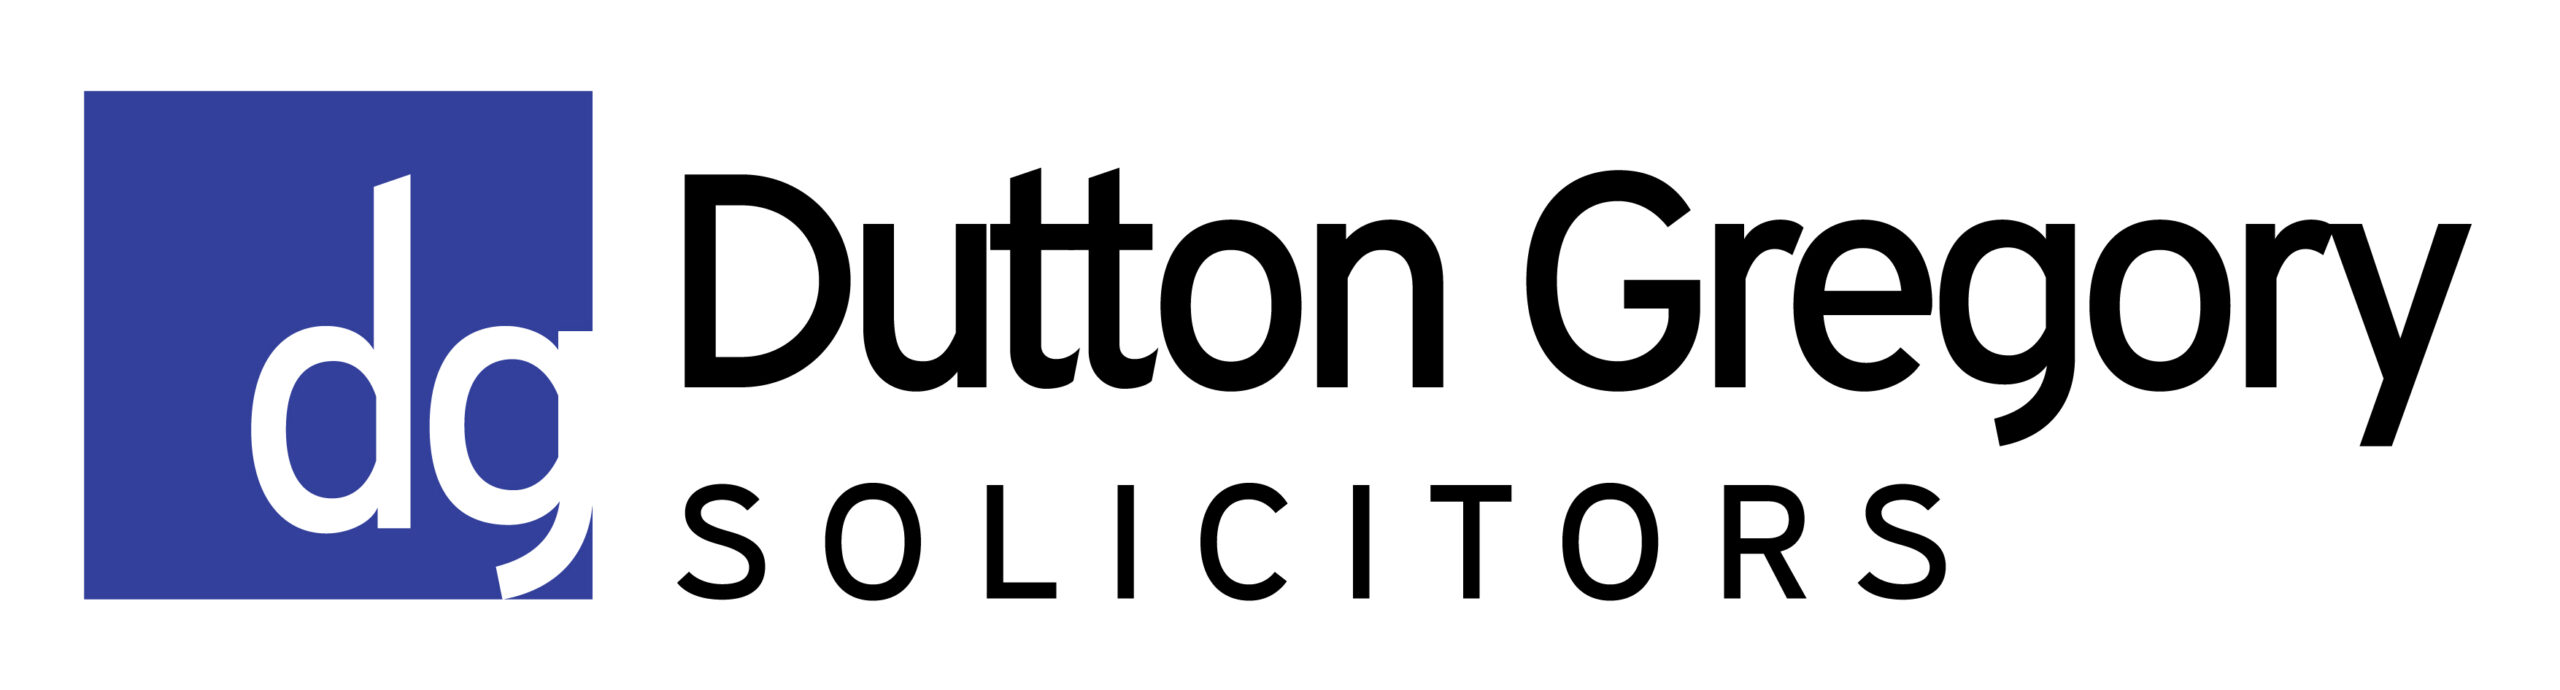 Dutton Gregory Solicitors - logo